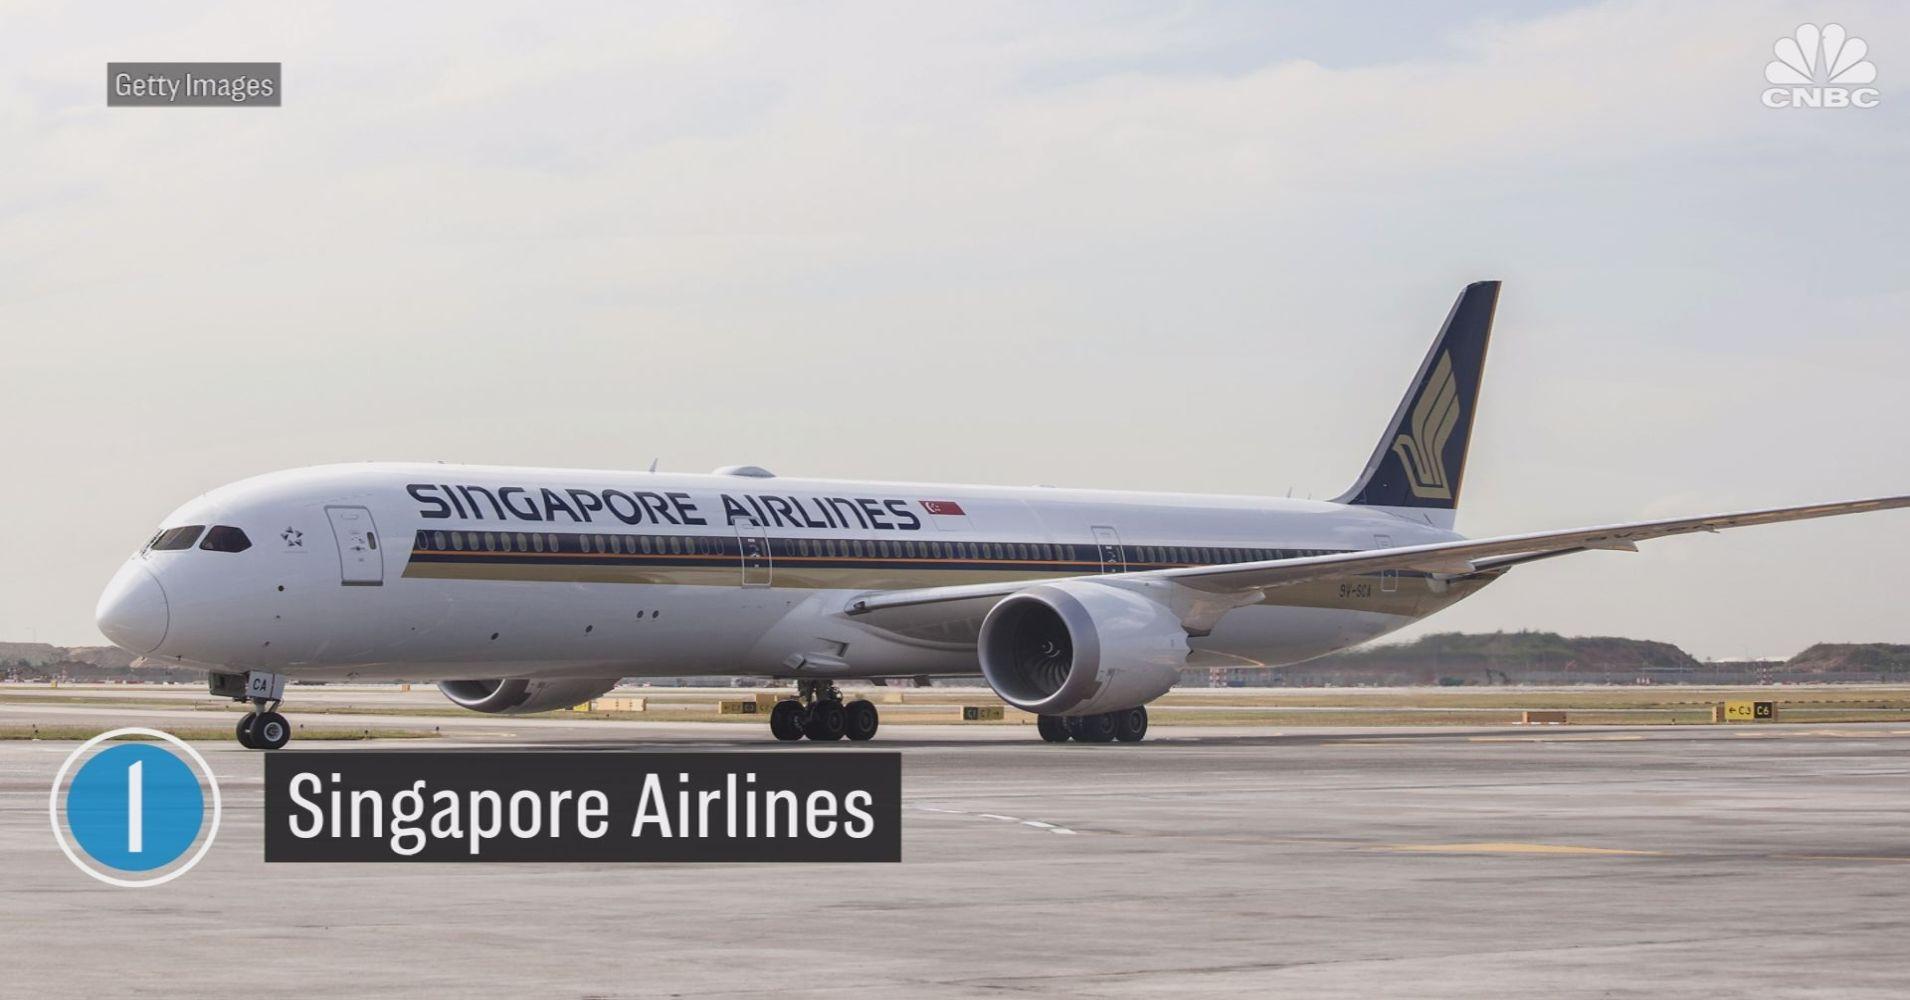 World's Top Airlines Logo - Here are the airlines in the world as ranked